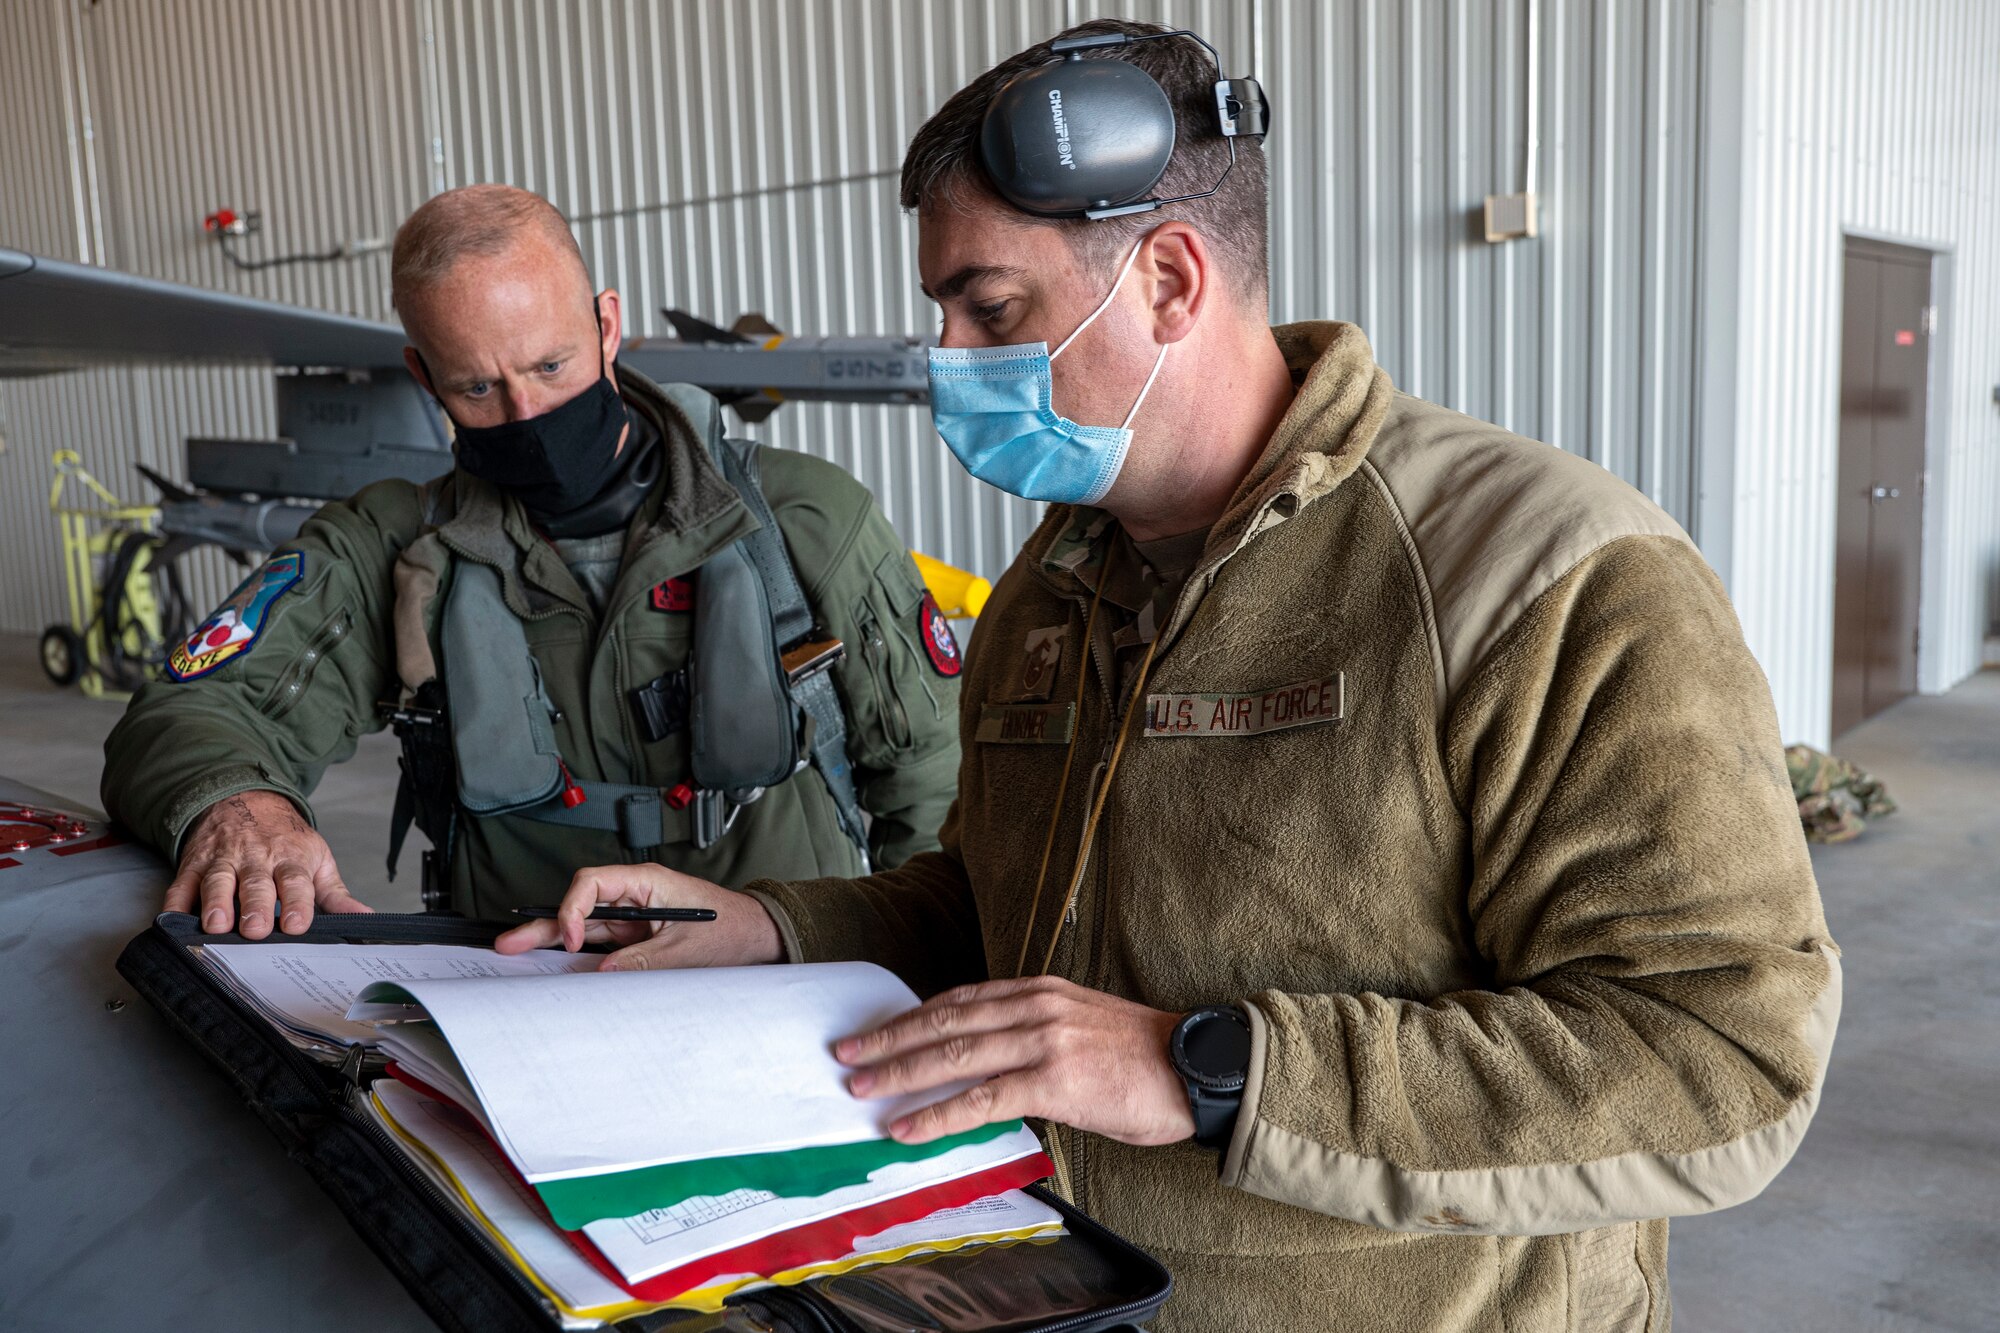 U.S. Air Force Lt. Col. Teneyck Latourrette, a pilot, and Senior Master Sgt. Michael Horner, both from the 140th Wing, Colorado Air National Guard, Buckley Air Force Base, look over aircraft forms before takeoff during Operation Noble Defender, Sept. 21, 2020, 5 Wing Goose Bay, Newfoundland Labrador. North American Aerospace Defense Command conducted a dynamic force employment operation in the Arctic Sept. 20-23 to demonstrate NORAD’s air capability, readiness and will to defend the United States and Canada.